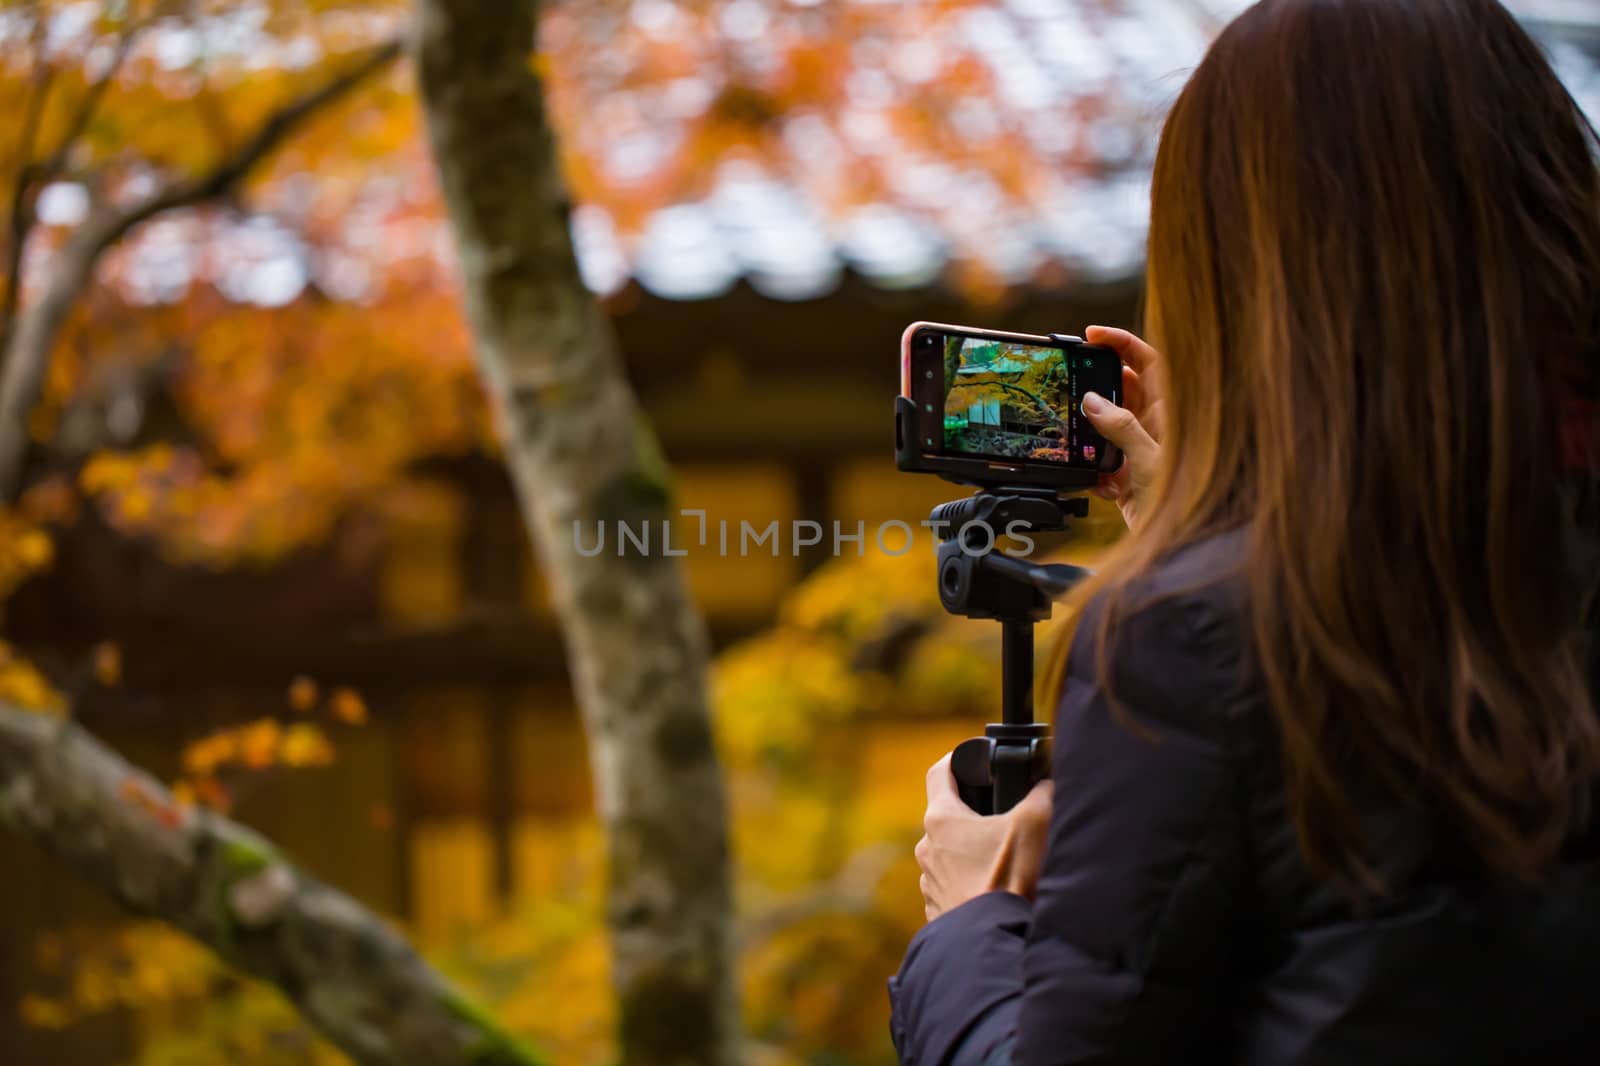 Daigo, Kyoto Japan. 24/11/2019. A Japanese woman using a smartphone to capture the colors of autumn.